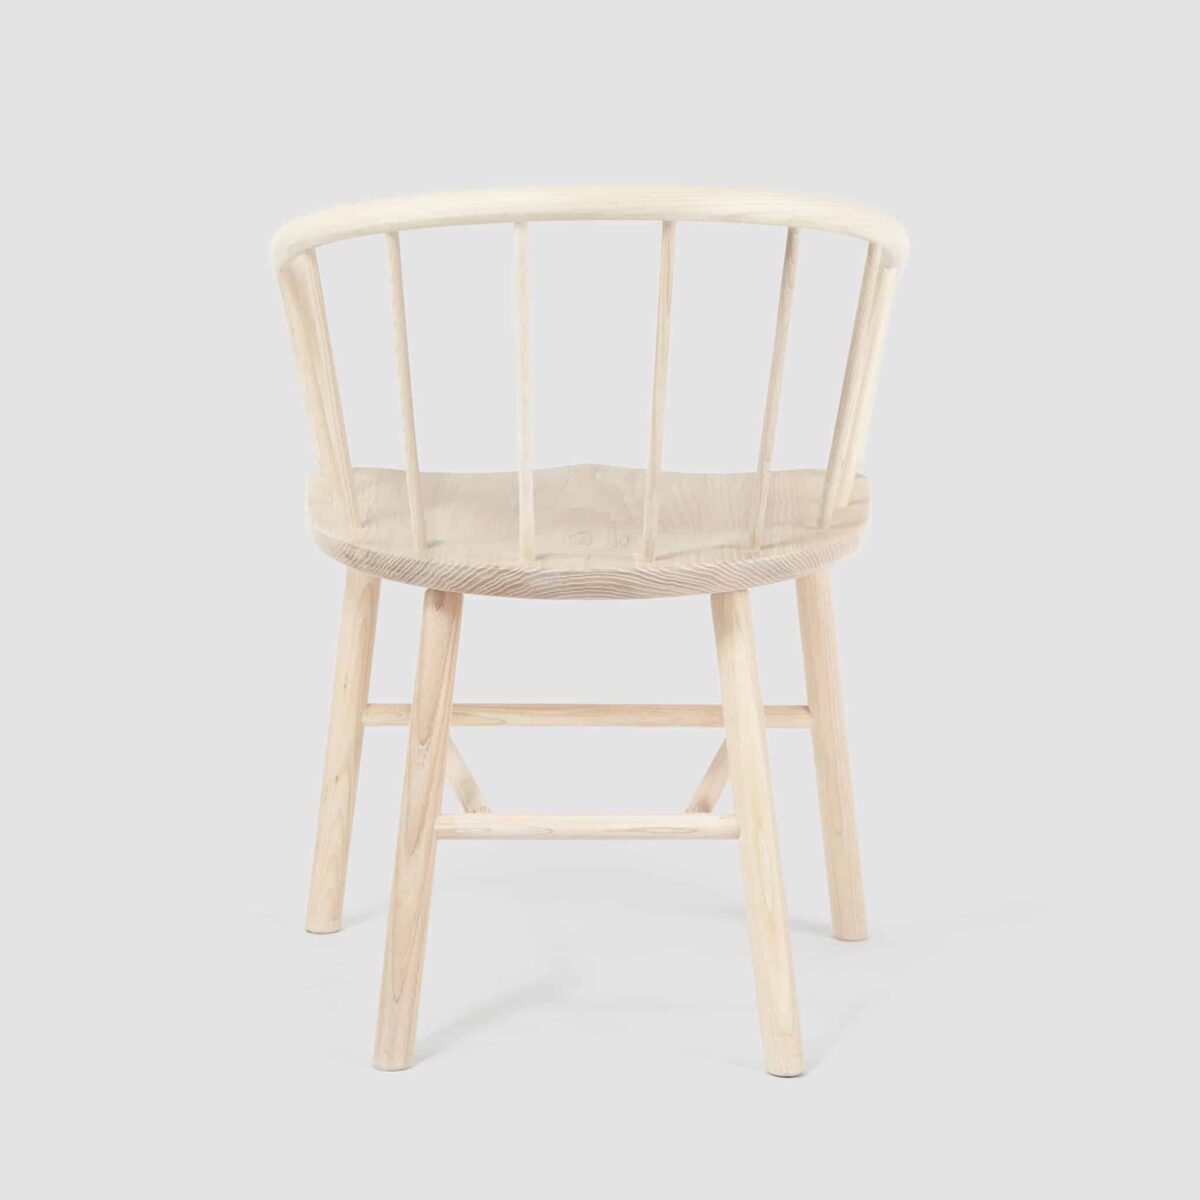 dorset-series-one-hardy-chair-ash-another-country-002